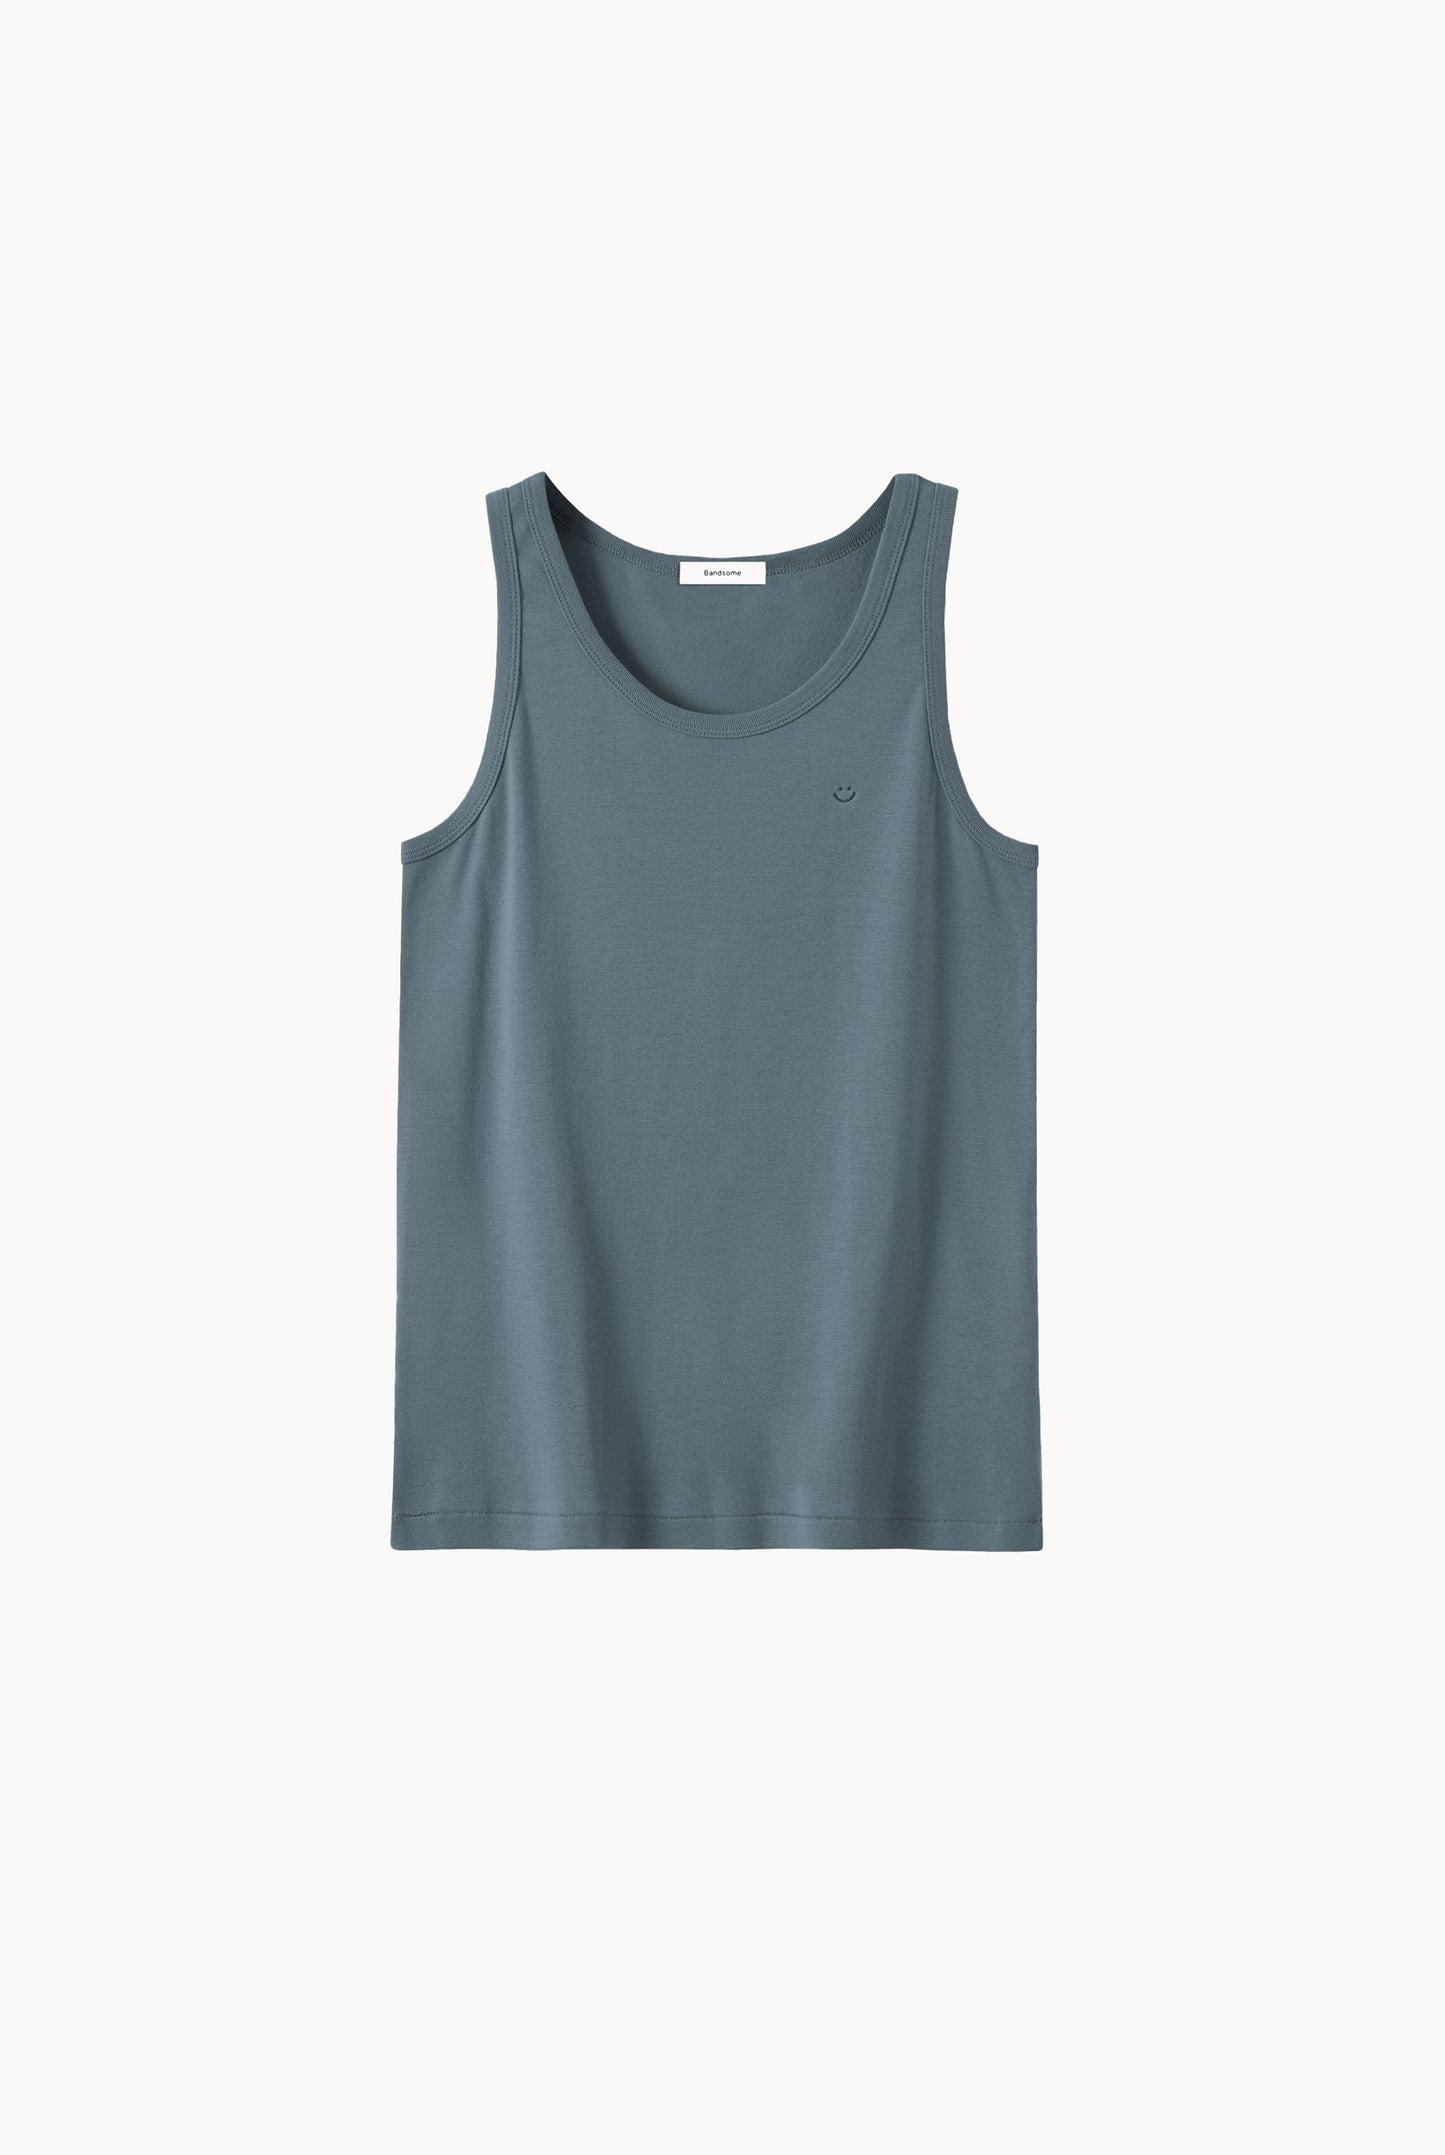 ribbed singlet charcoal blue